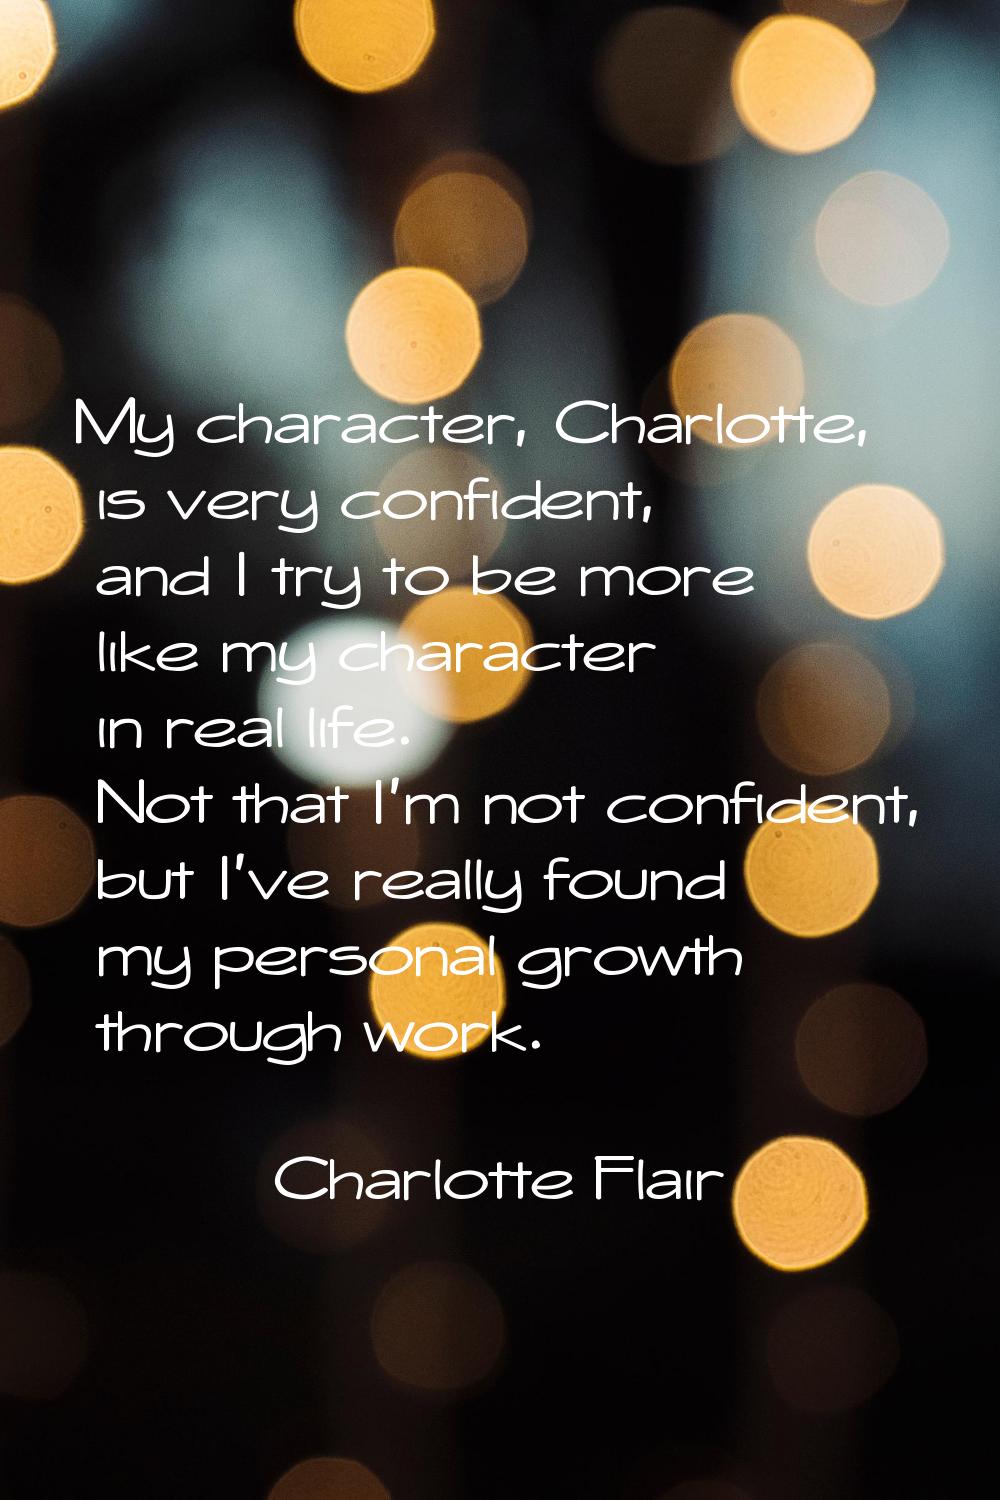 My character, Charlotte, is very confident, and I try to be more like my character in real life. No